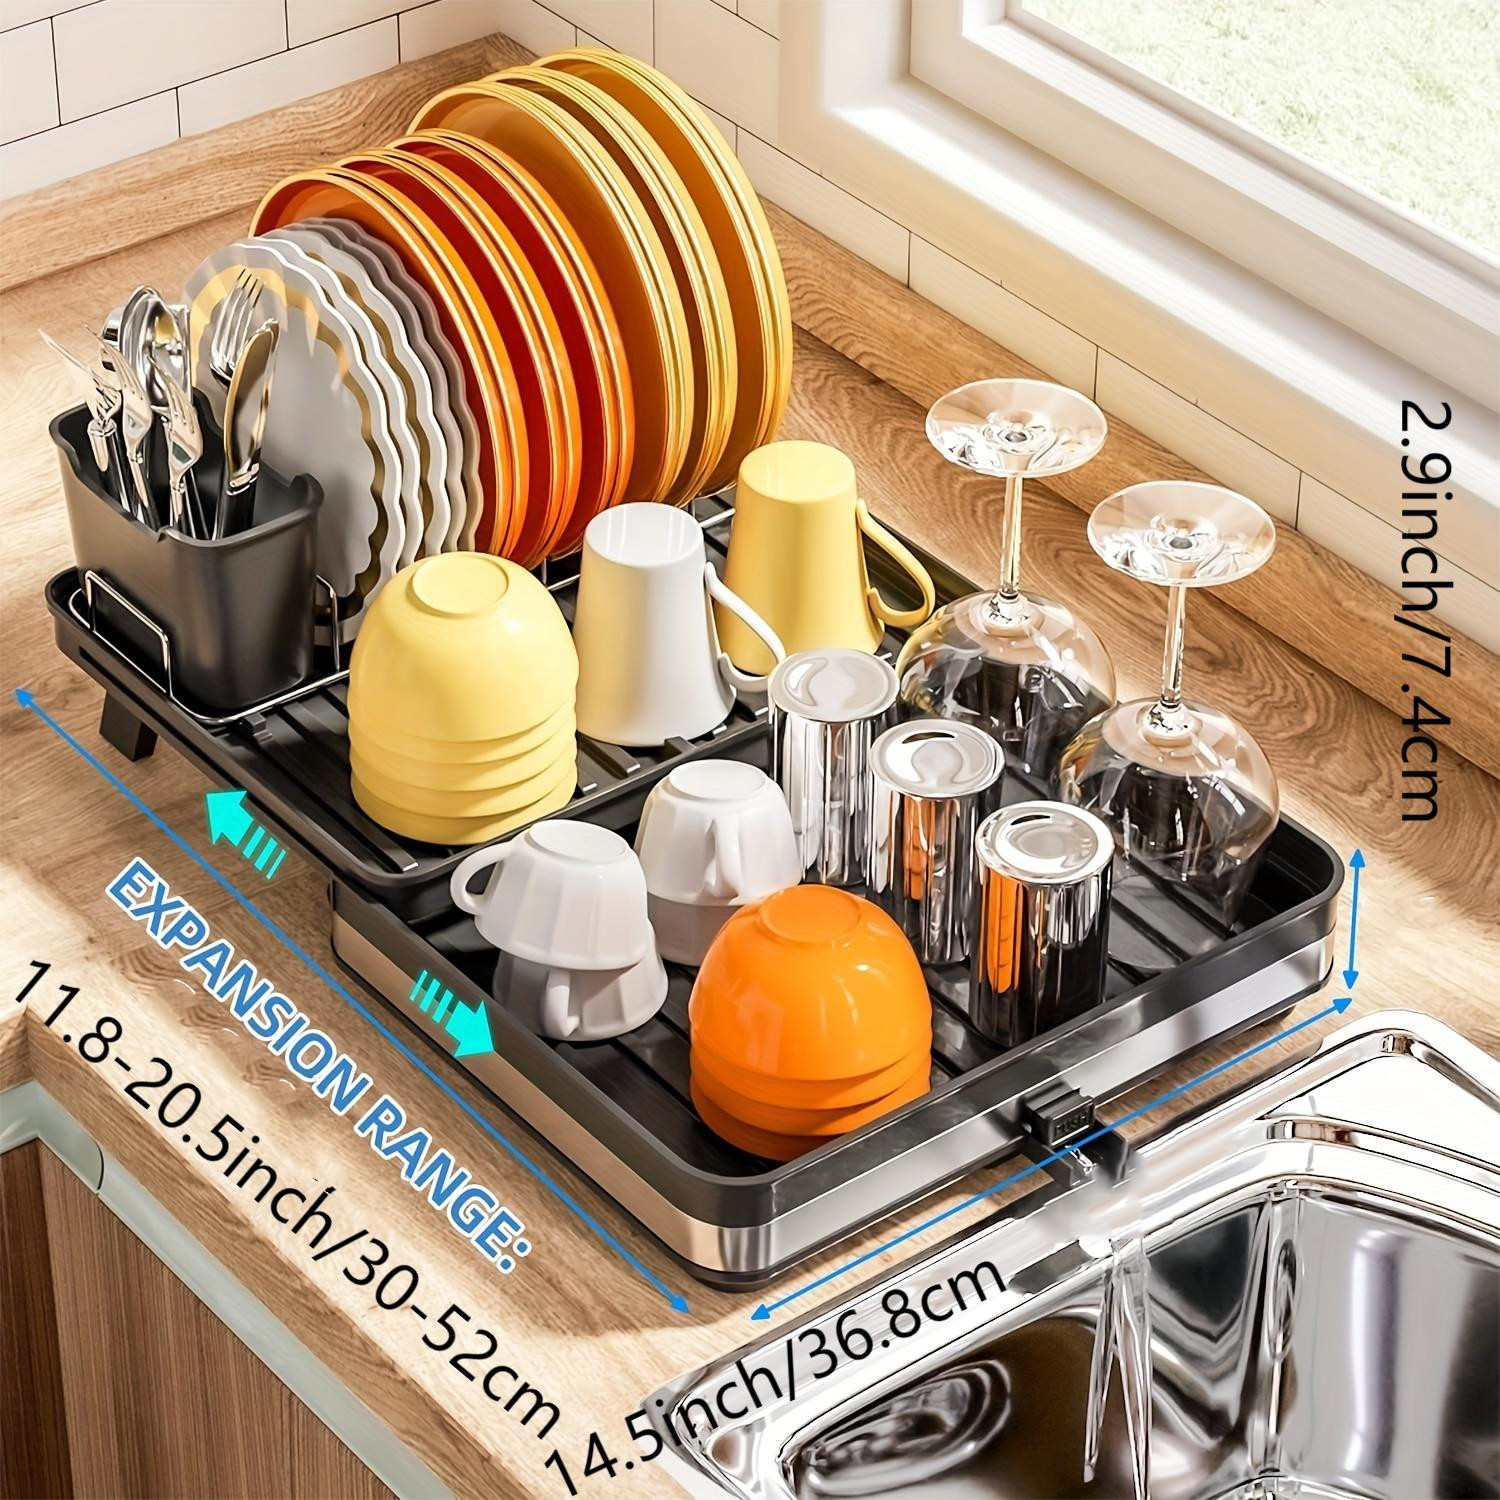  Dish Drying Rack - Small Dish Rack for Kitchen Counter with  Drainboard, Stainless Steel Dish Drainer with Utensil Holder Over Sink, in  Sink and on Countertop, Black